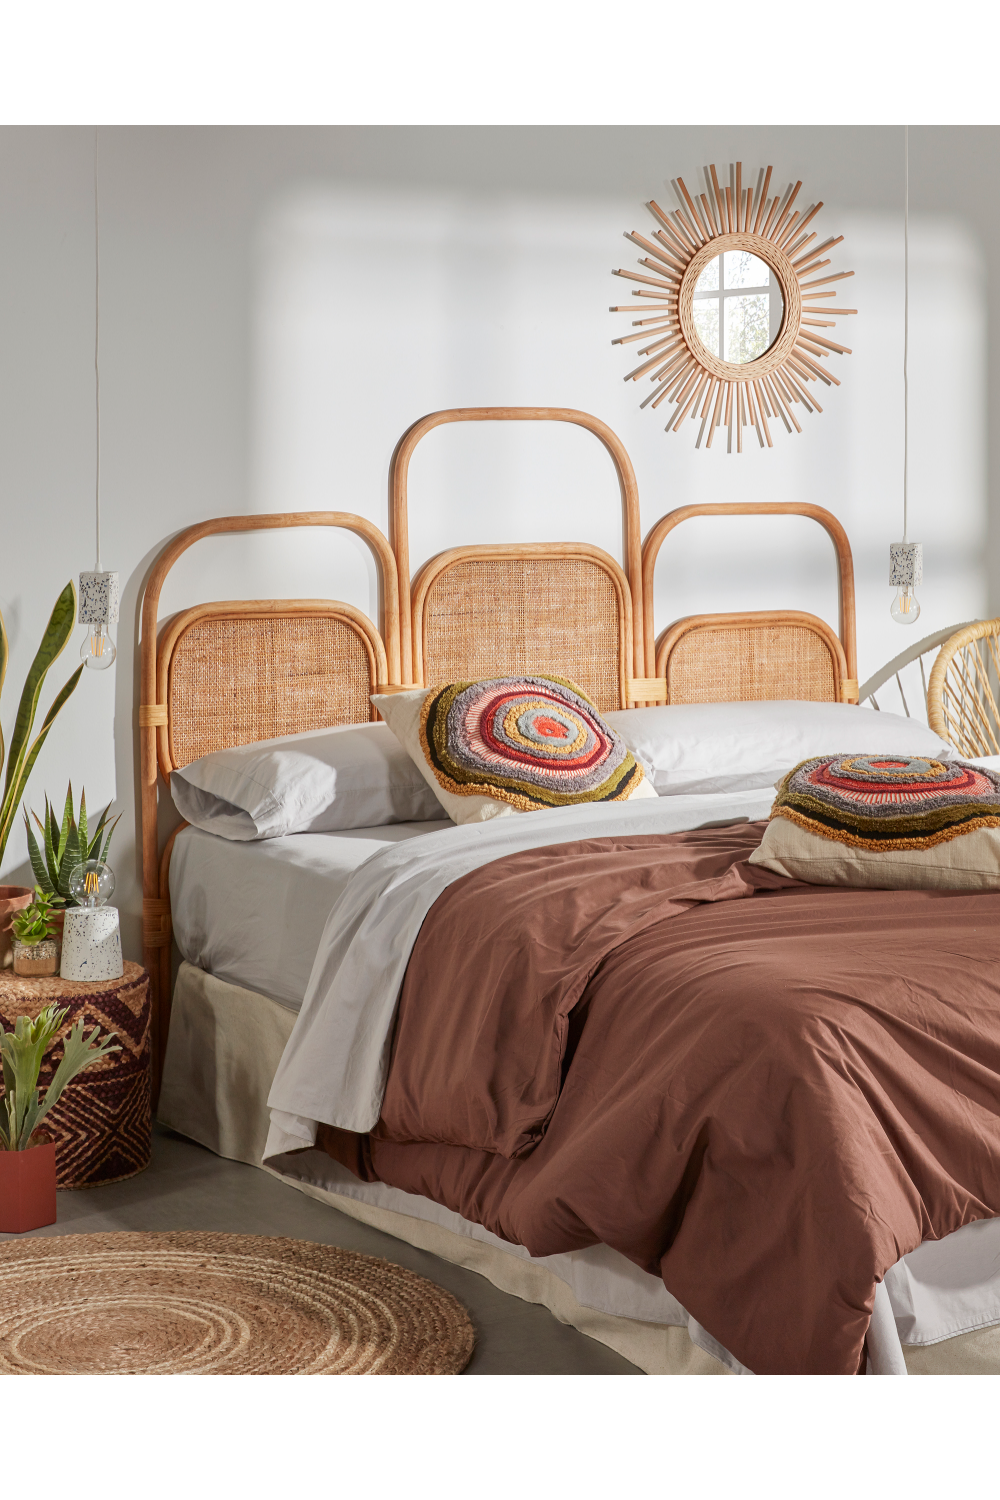 The Beauty of Queen Size Headboards: Adding Elegance to Your Bedroom